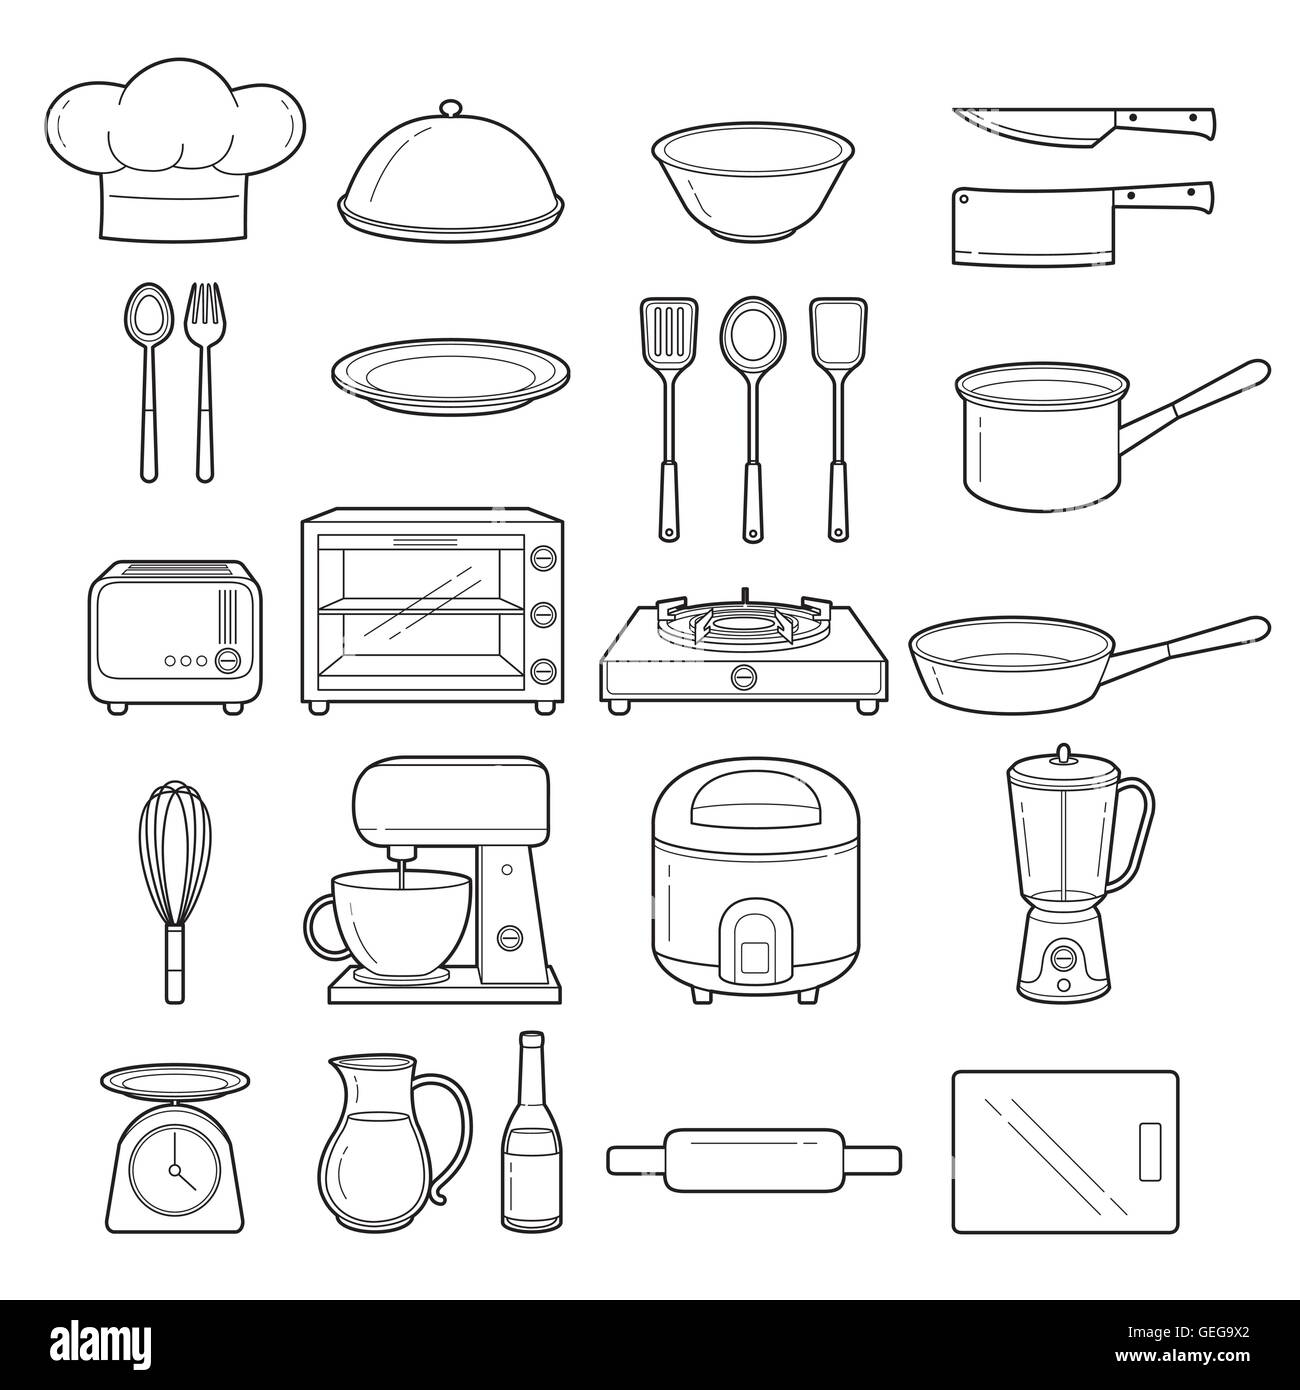 Kitchen Equipment Outline Icons Set, Appliance, Crockery, Cooking, Cuisine, Food, Bakery Stock Vector